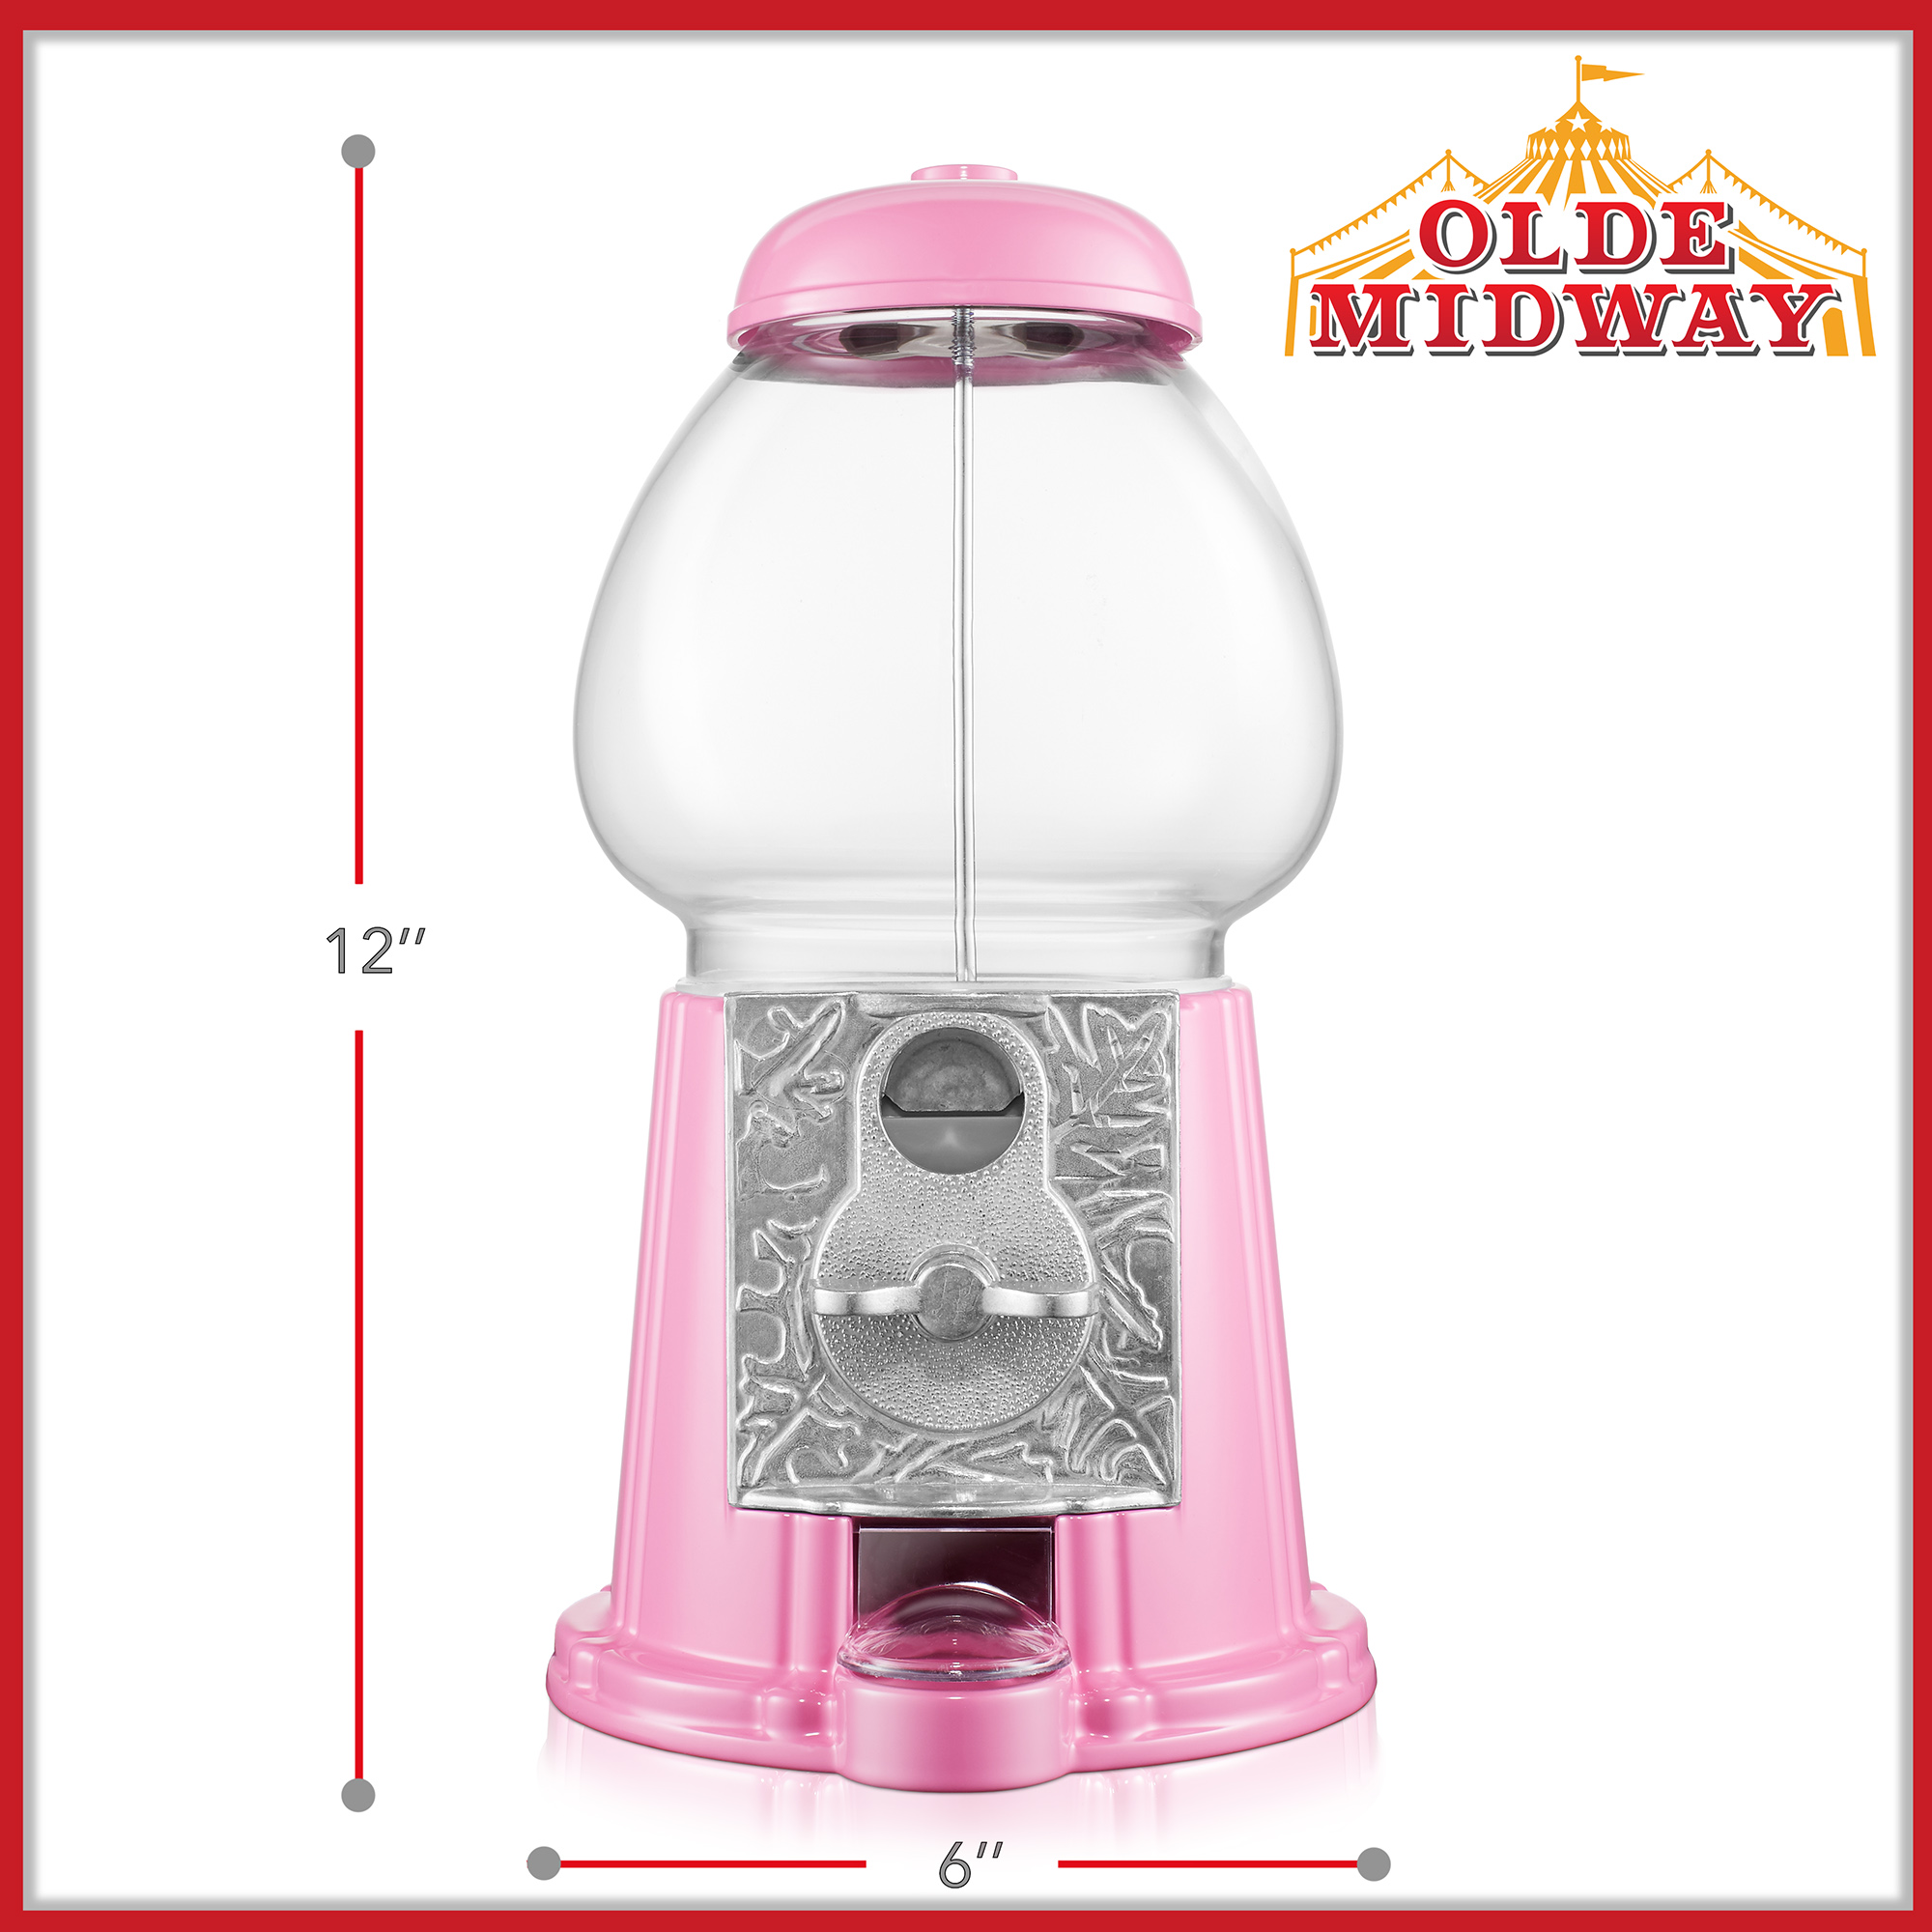 Olde Midway 12" Gumball Machine with Coin Bank - Pink, Vintage Bubble Gum Candy Dispenser